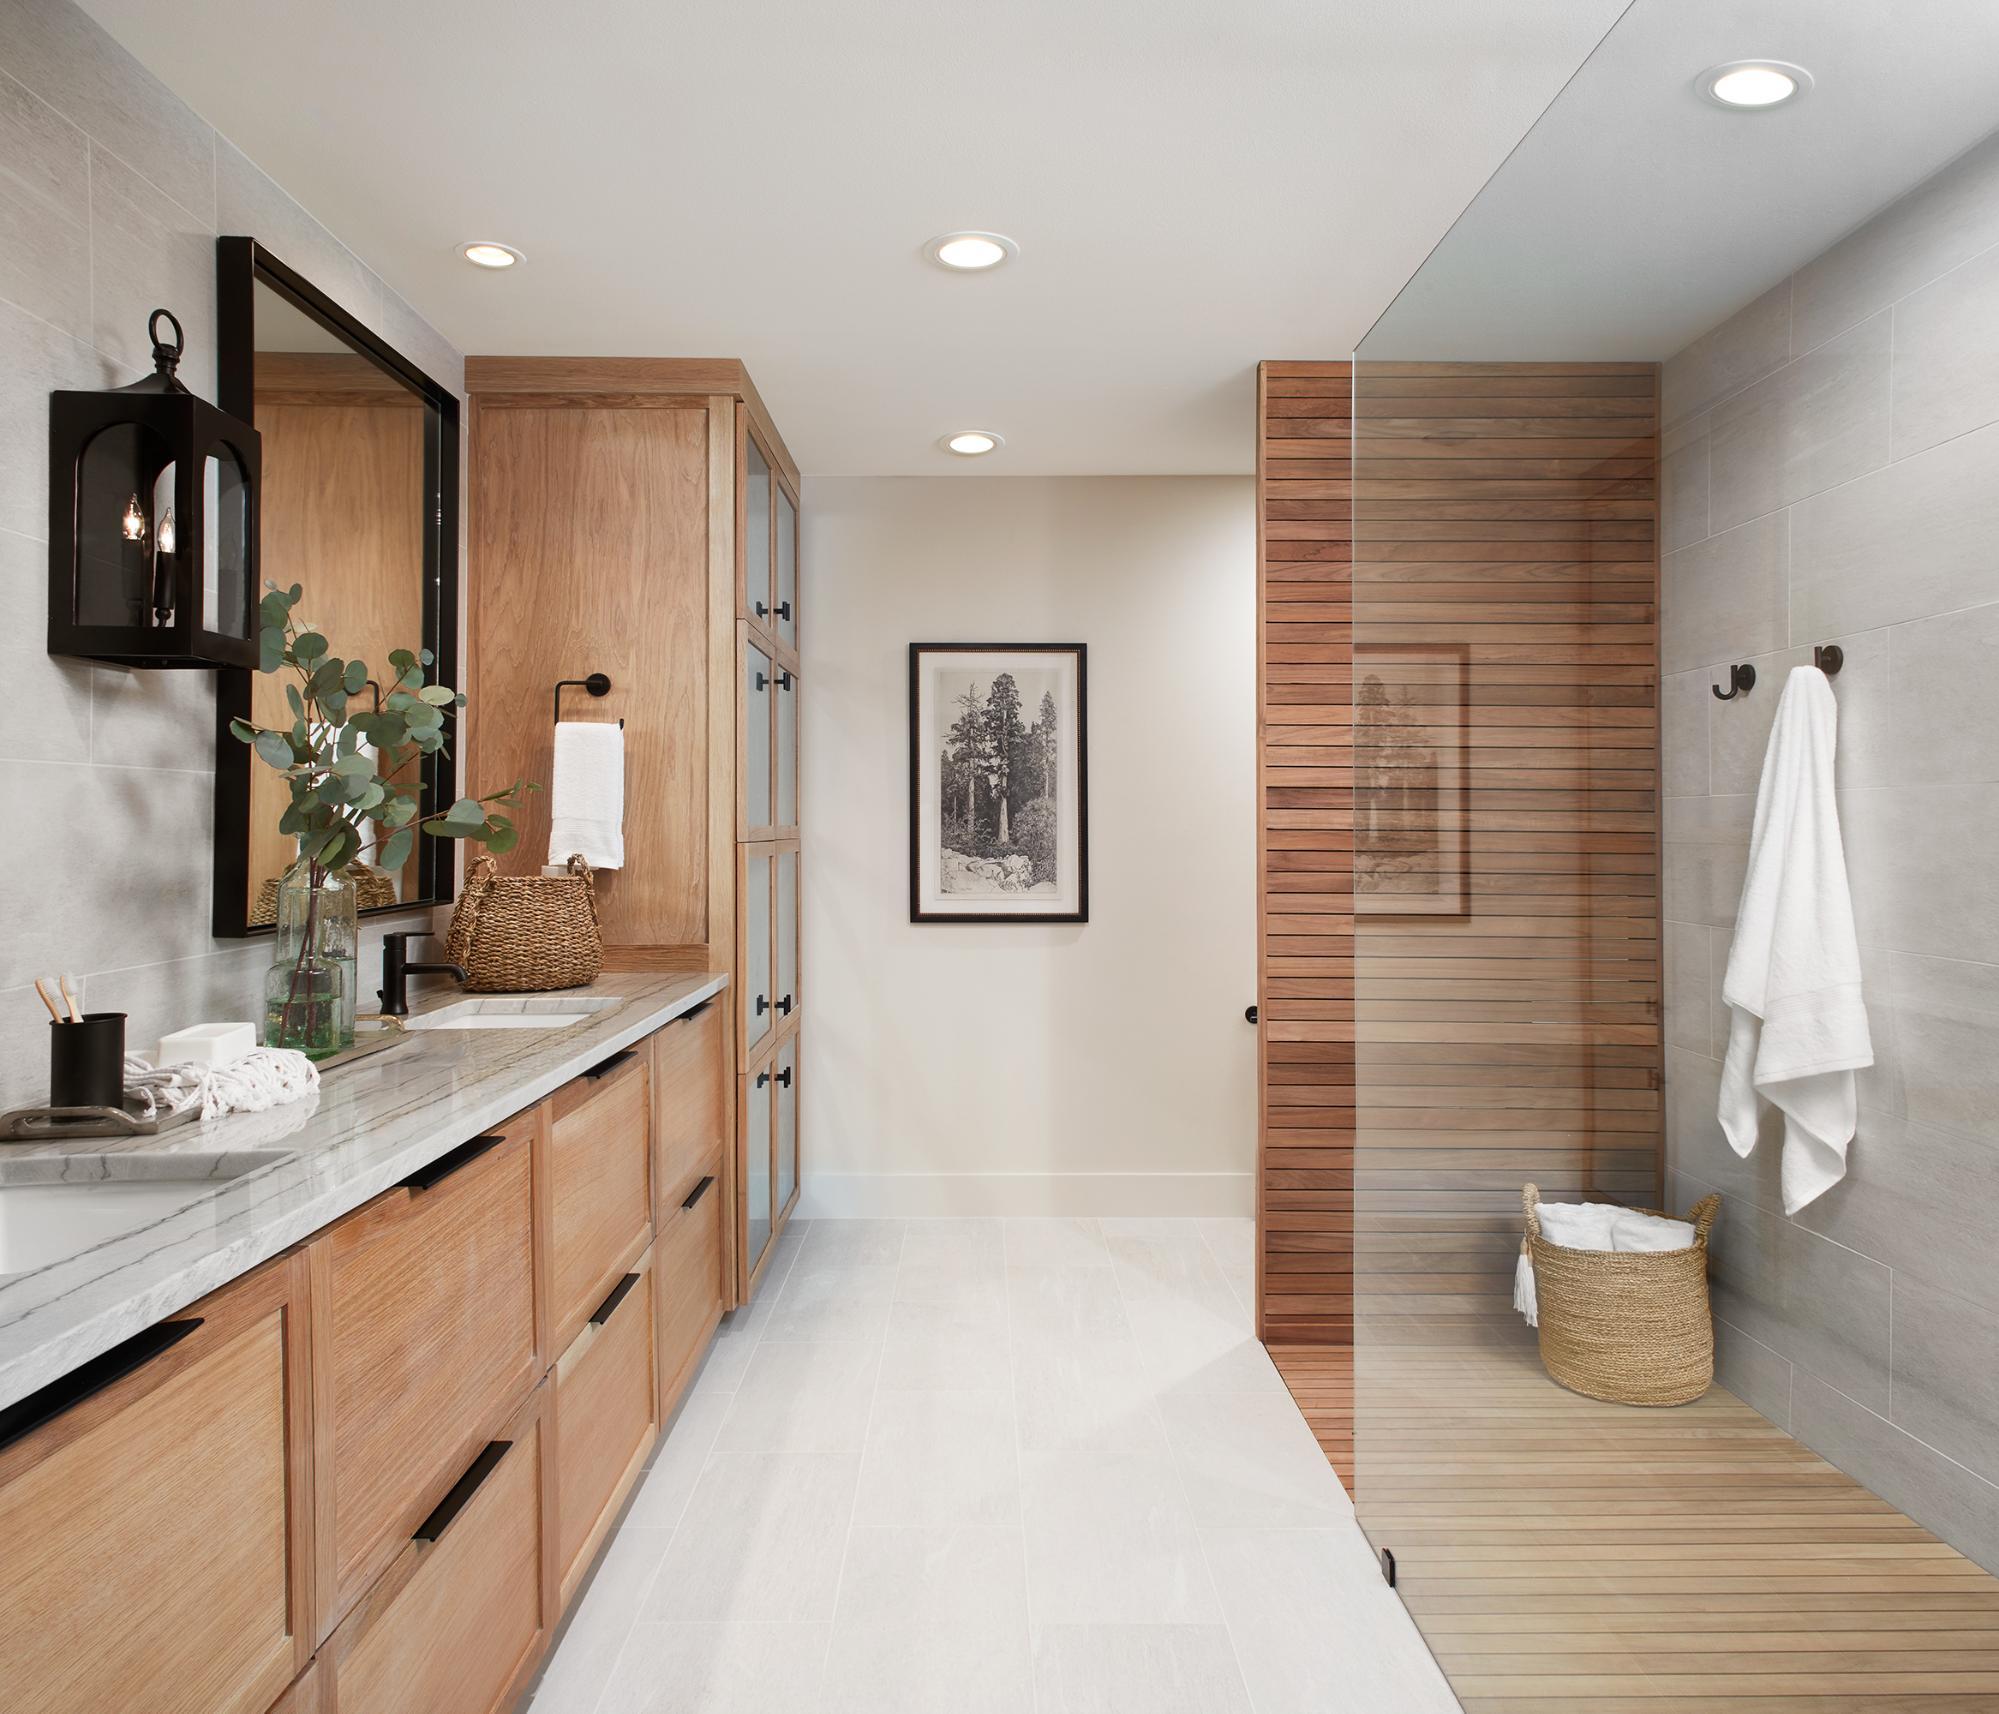 Joanna Gaines Has These Brilliant Tips For Creating The Perfect Master Bathroom